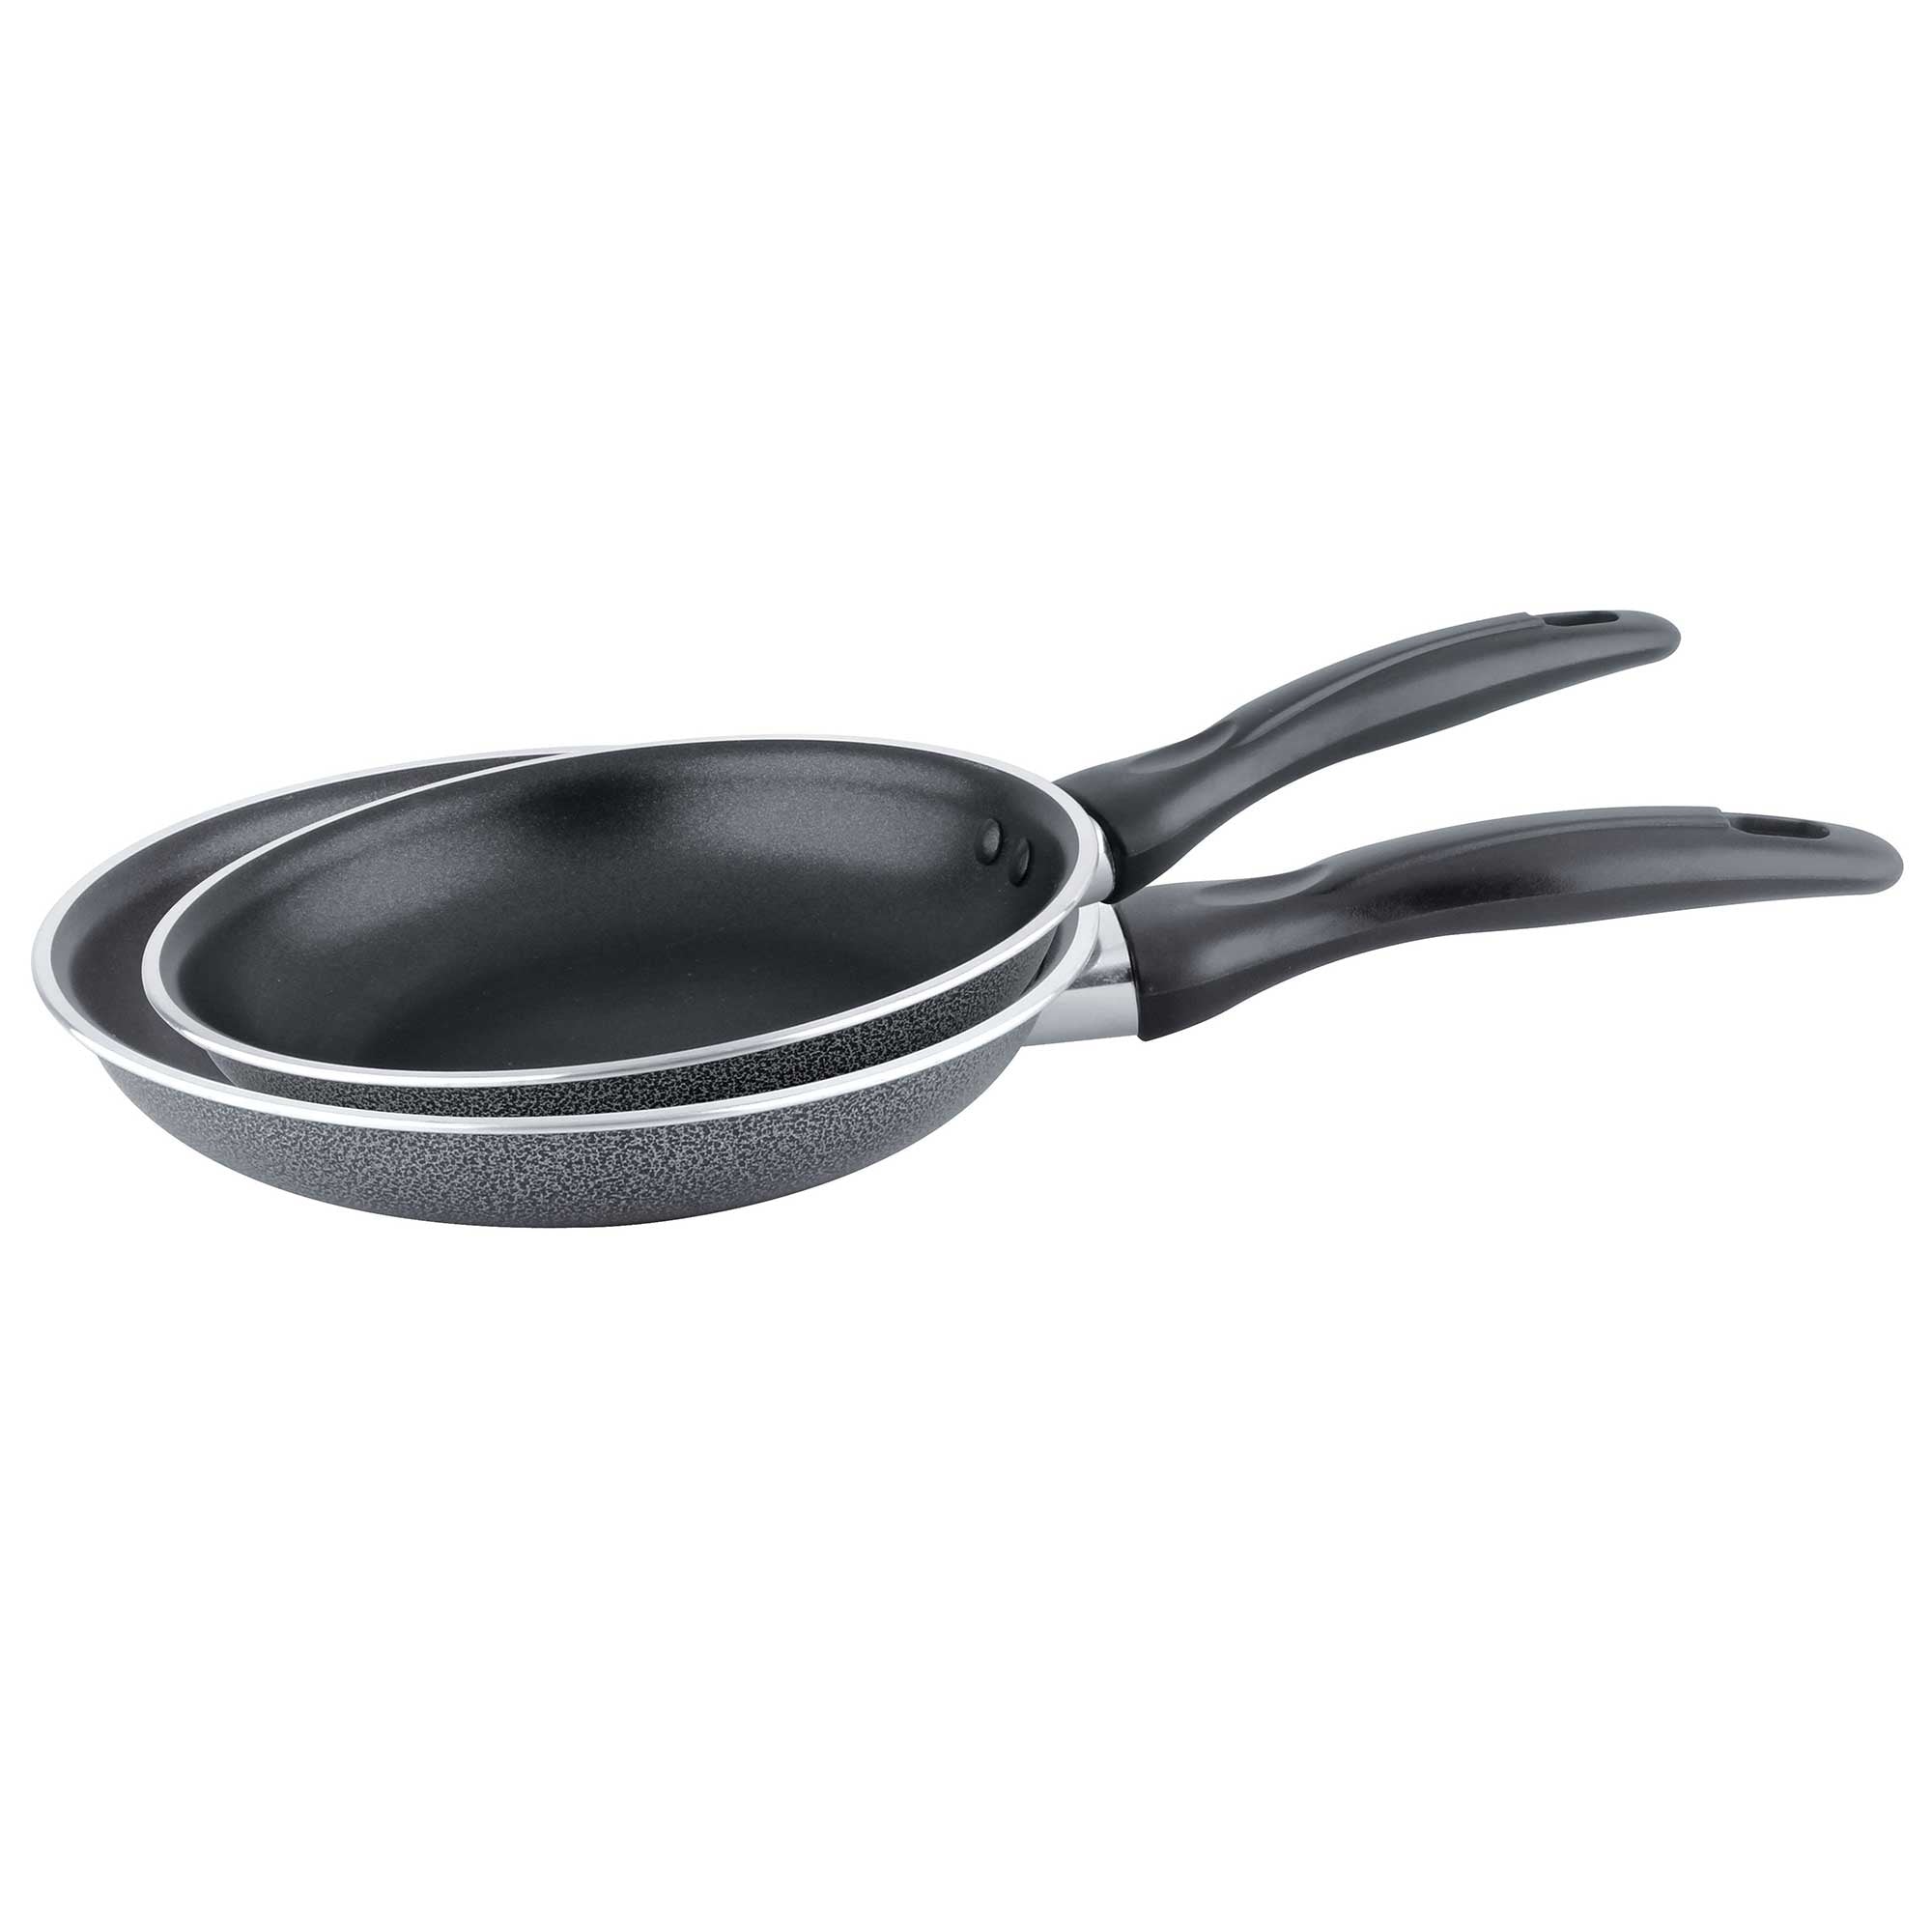 Brentwood BFP 320C 8 inch Non Stick Induction Copper Frying Pan 1